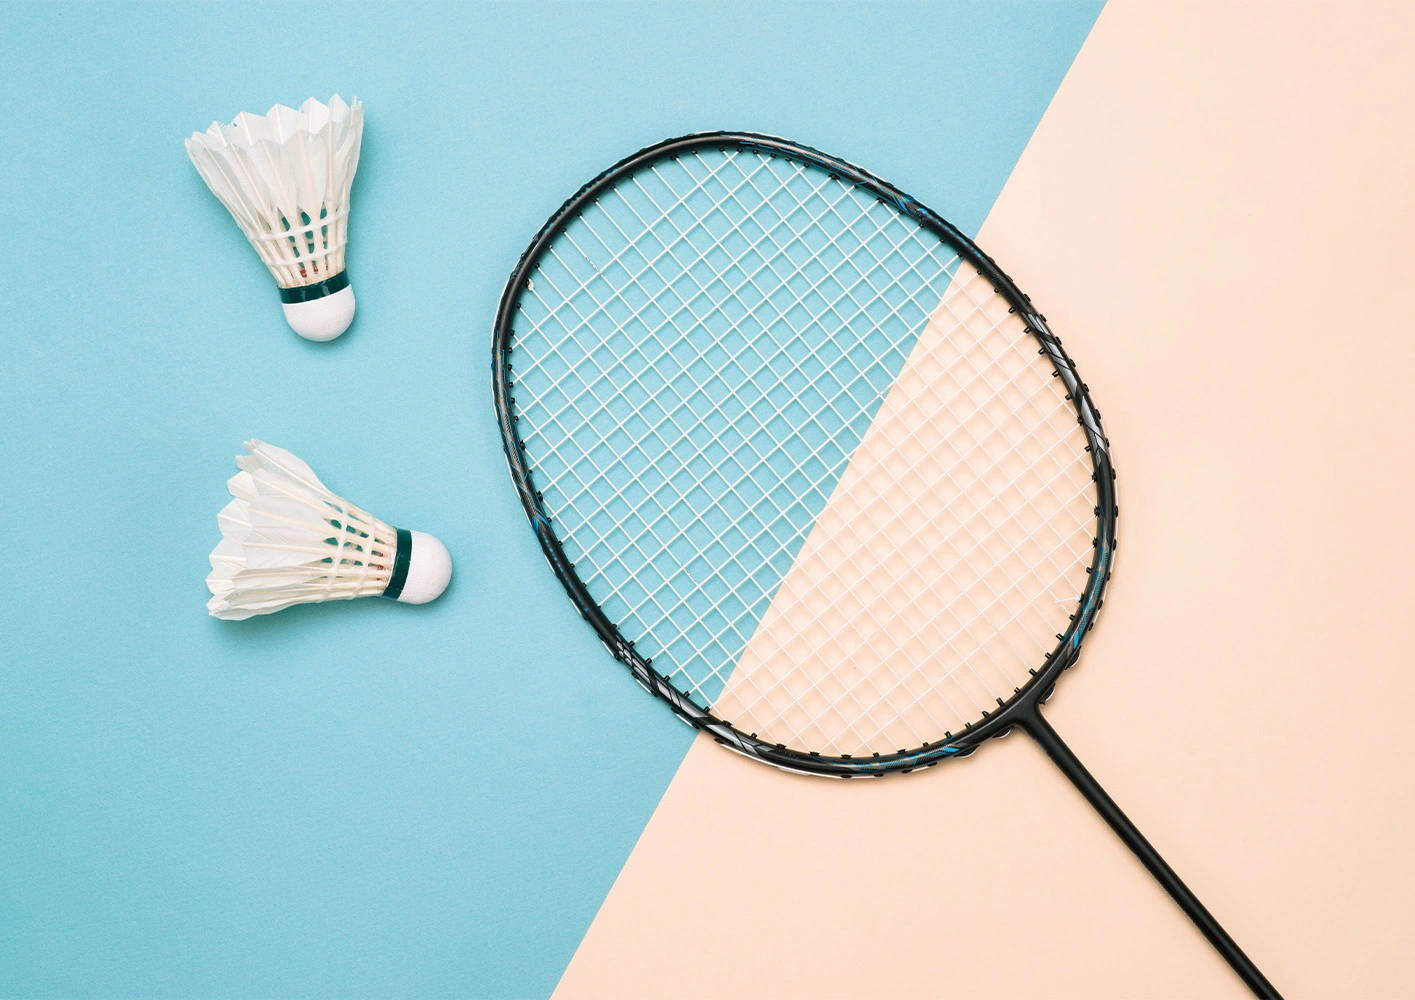 5 Reasons Why You Should Take Up Badminton